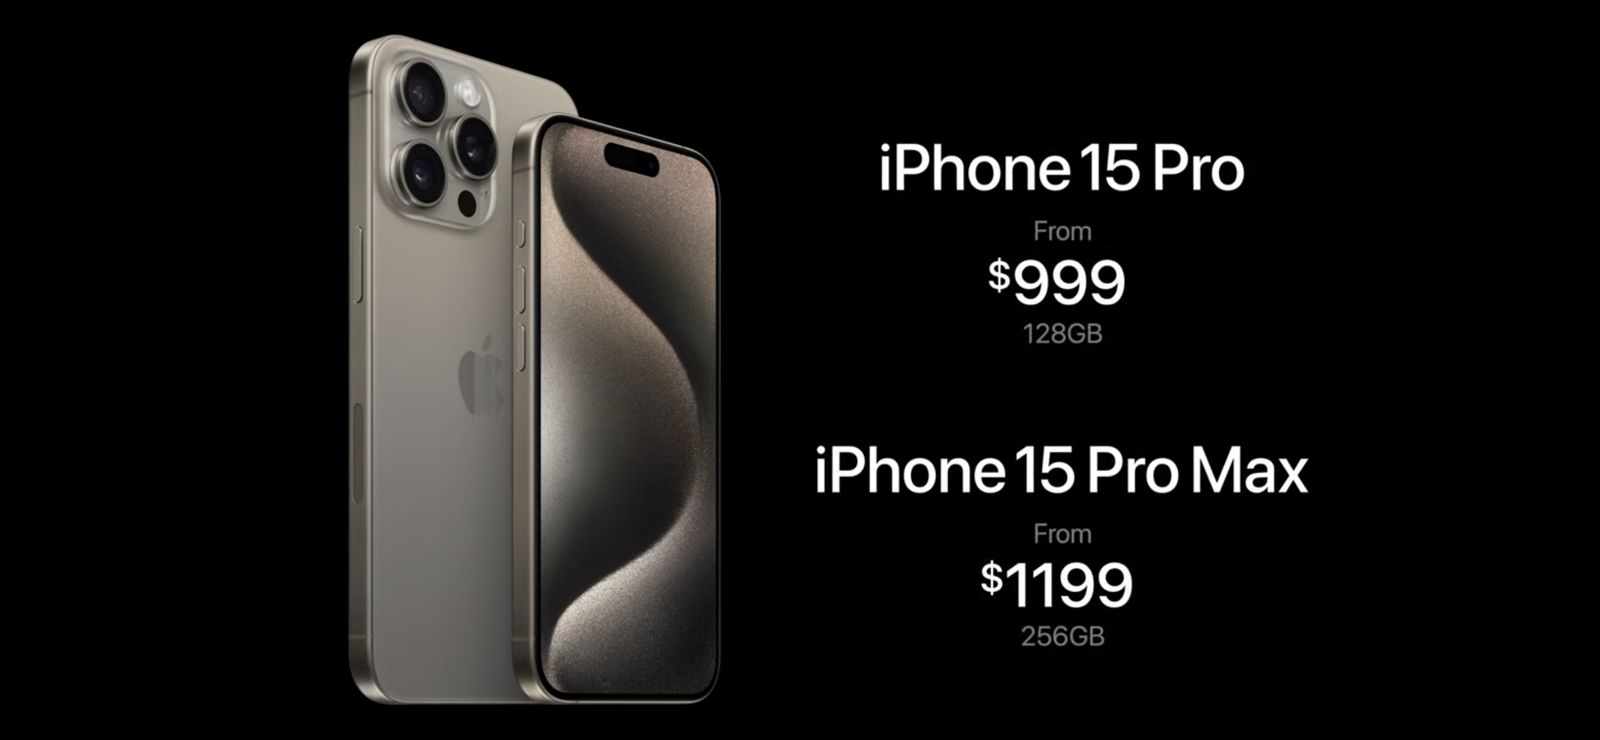 iPhone 15 Pro and Pro Max: Pricing